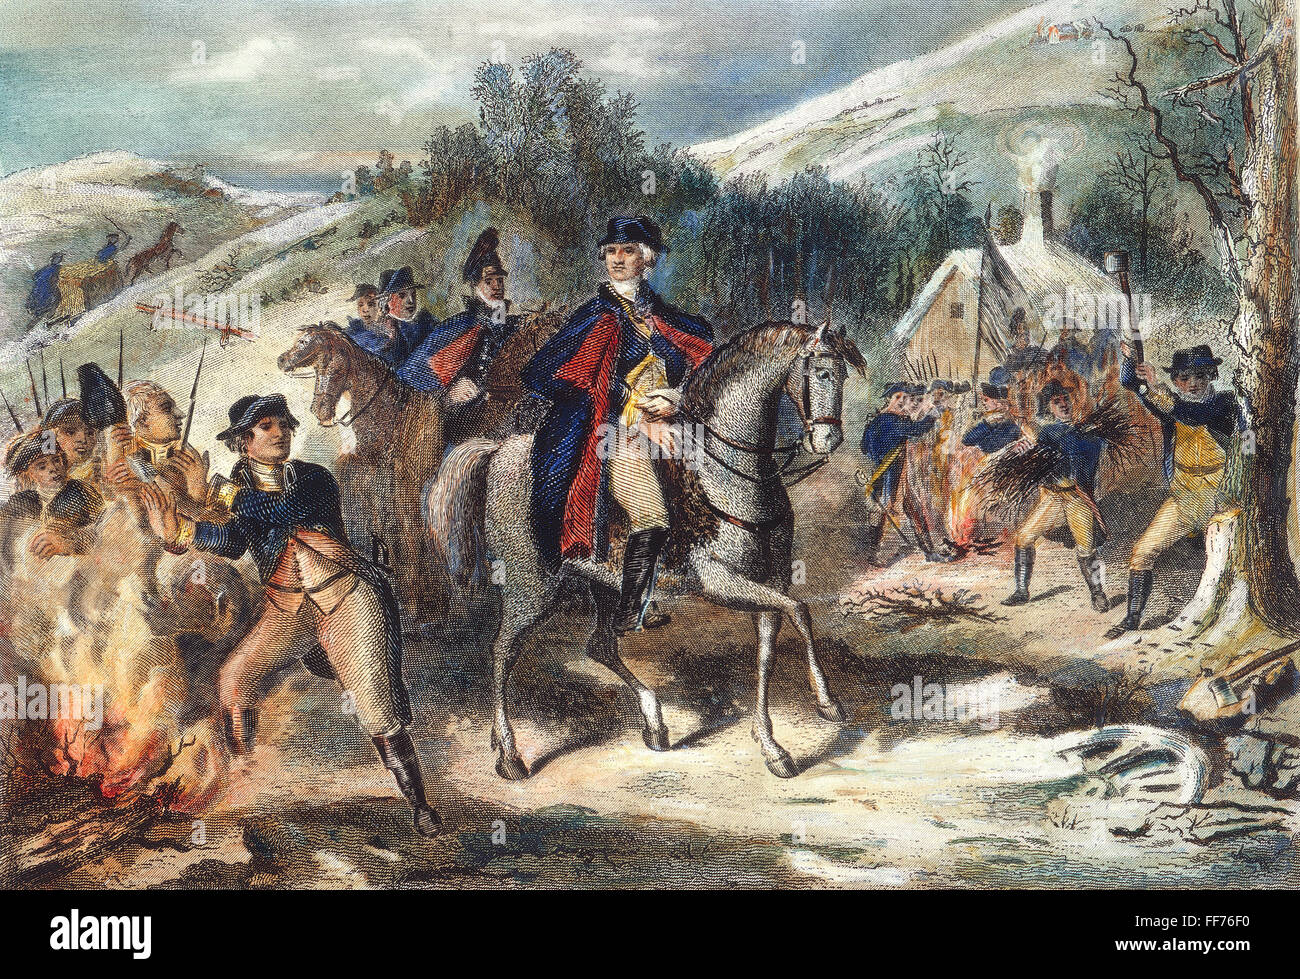 WASHINGTON: VALLEY FORGE. /nGeorge Washington inspecting the Continental Army at Valley Forge during the winter of 1777-78. Line engraving, 19th century. Stock Photo